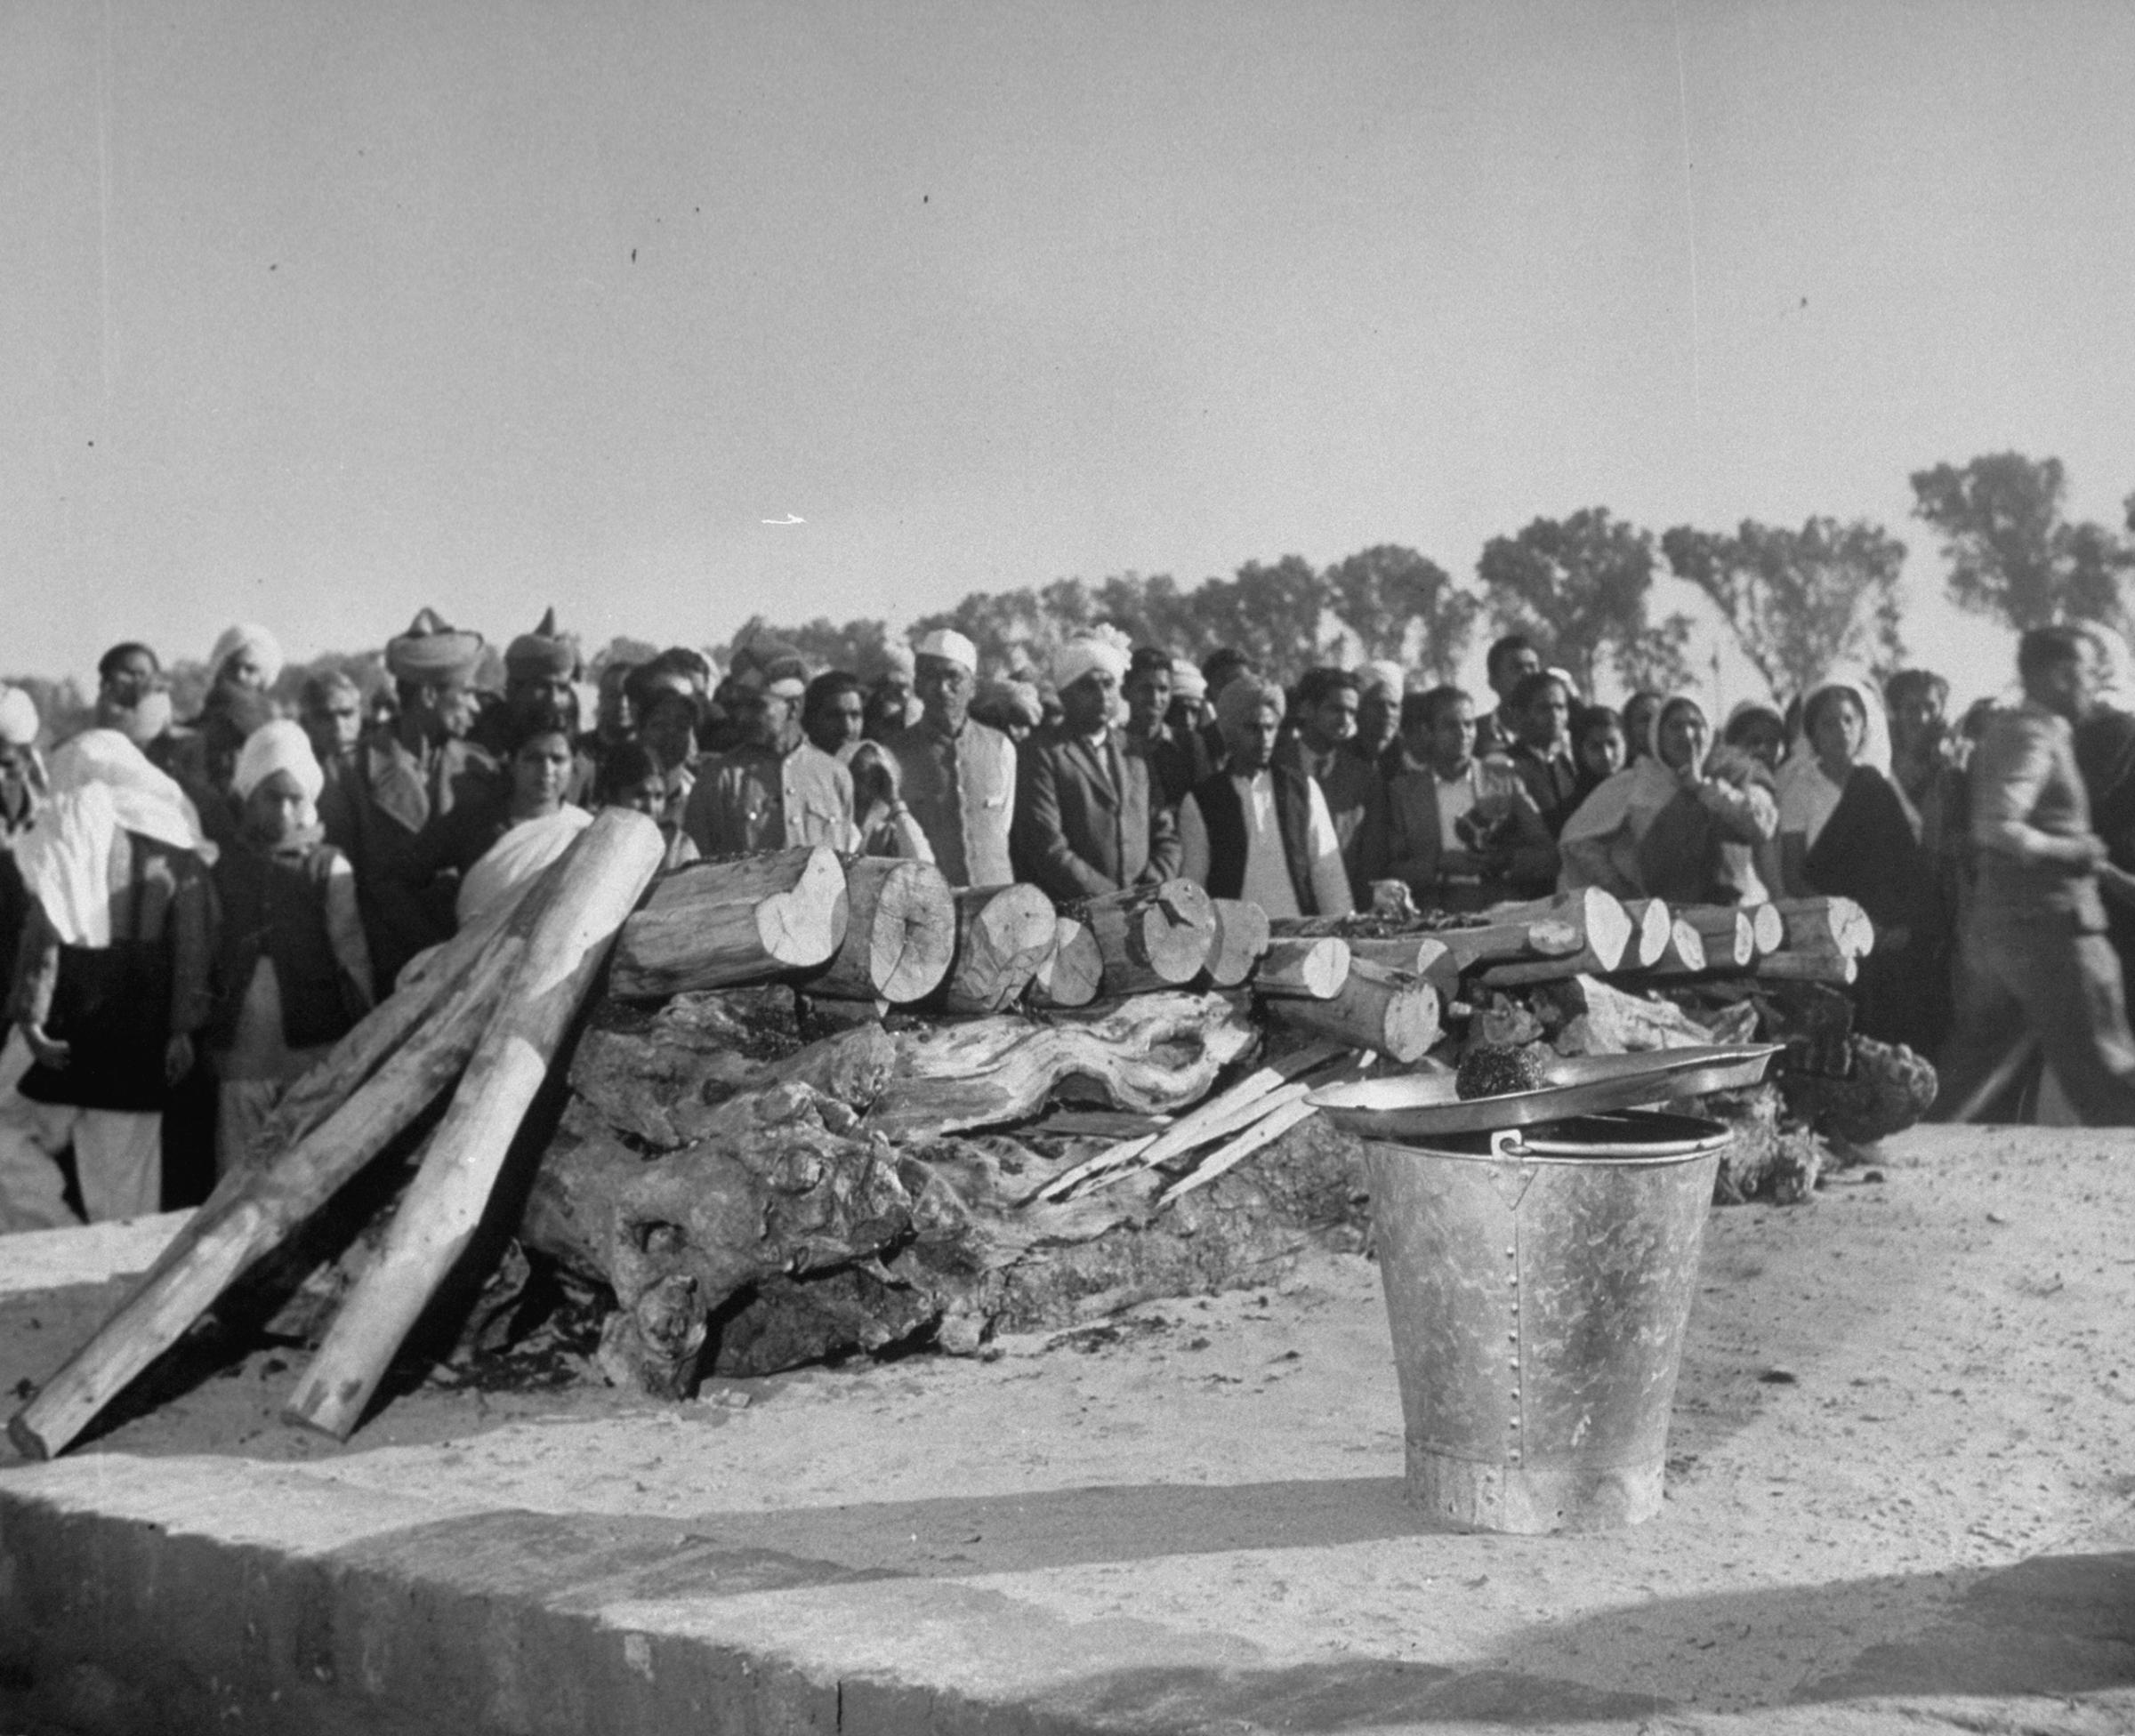 Mourners gather around wood stacked for Mohandas Gandhi's funeral pyre in 1948.